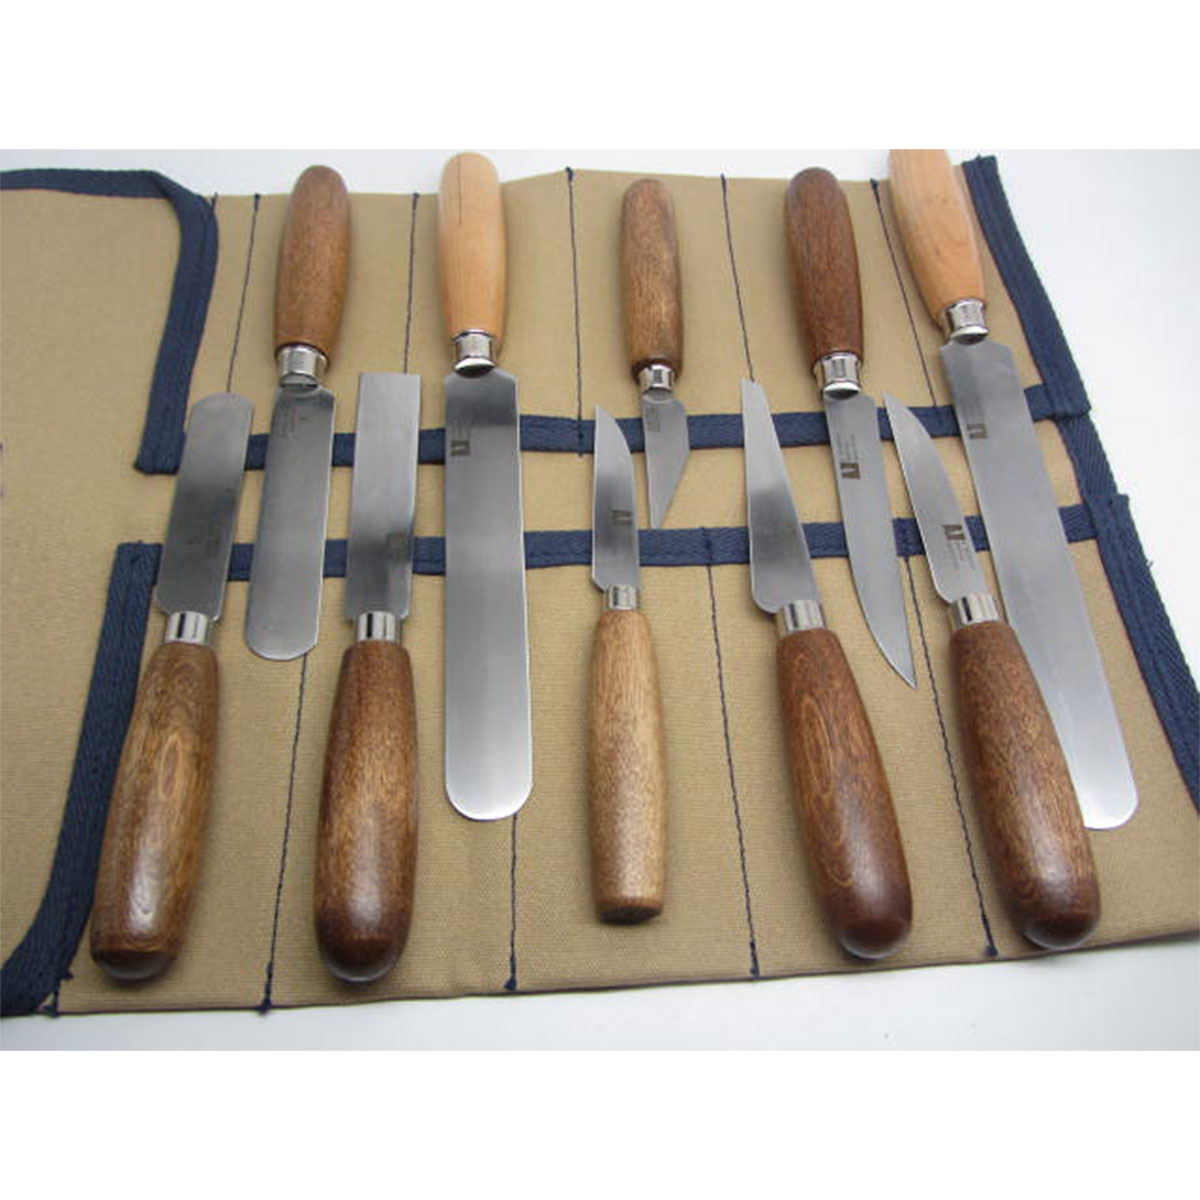 10pc Leather Workers Shoe Knives